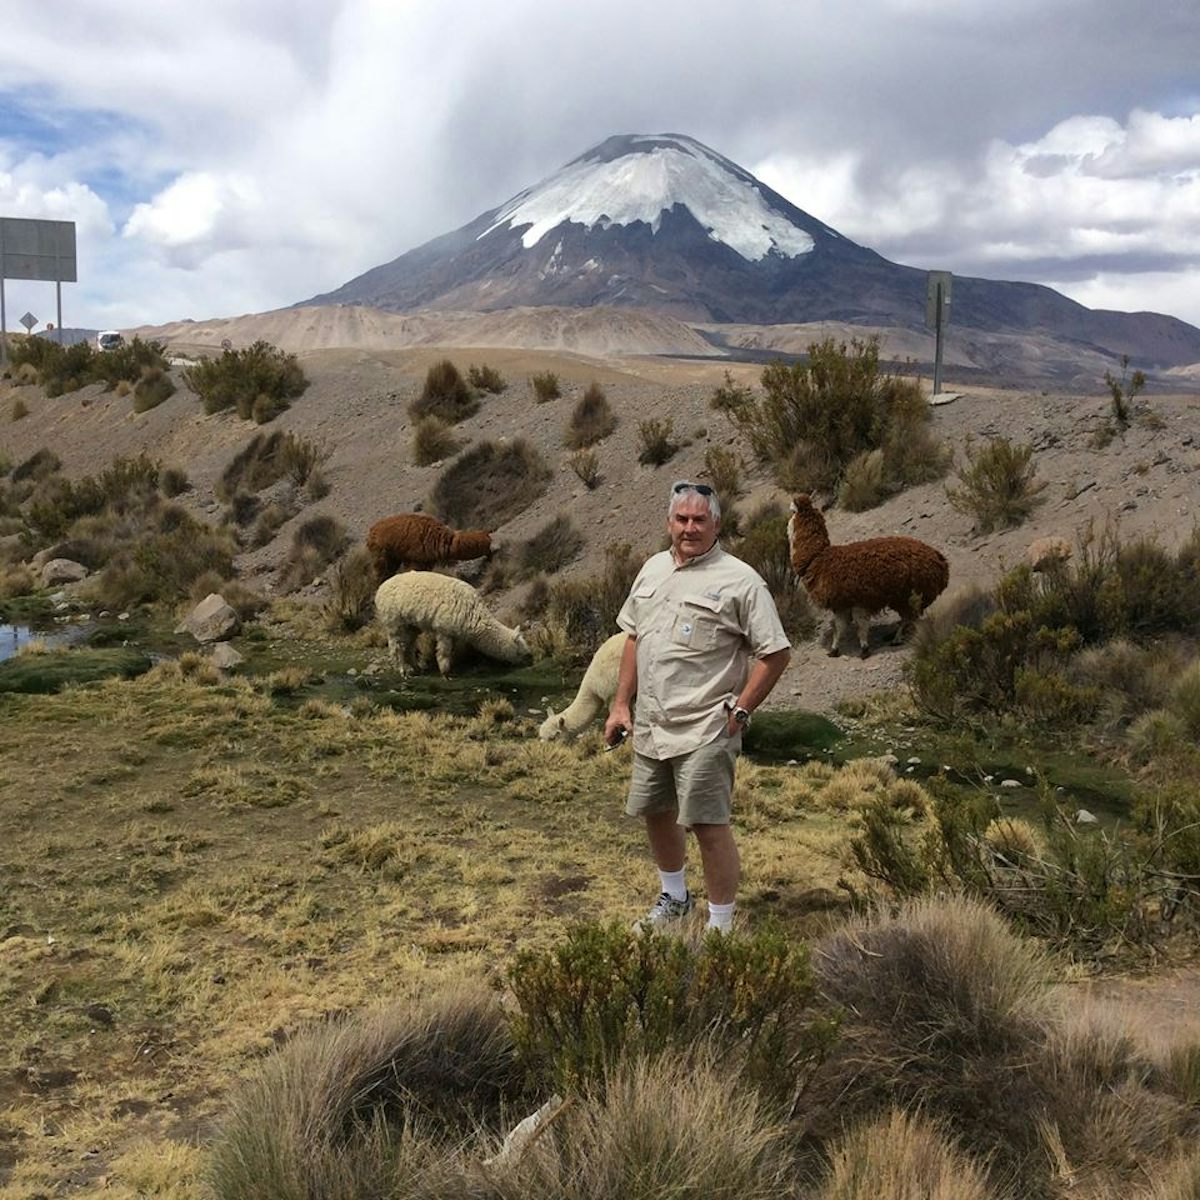 Visiting the llamas and alpacas in the Andes above Erica Chile